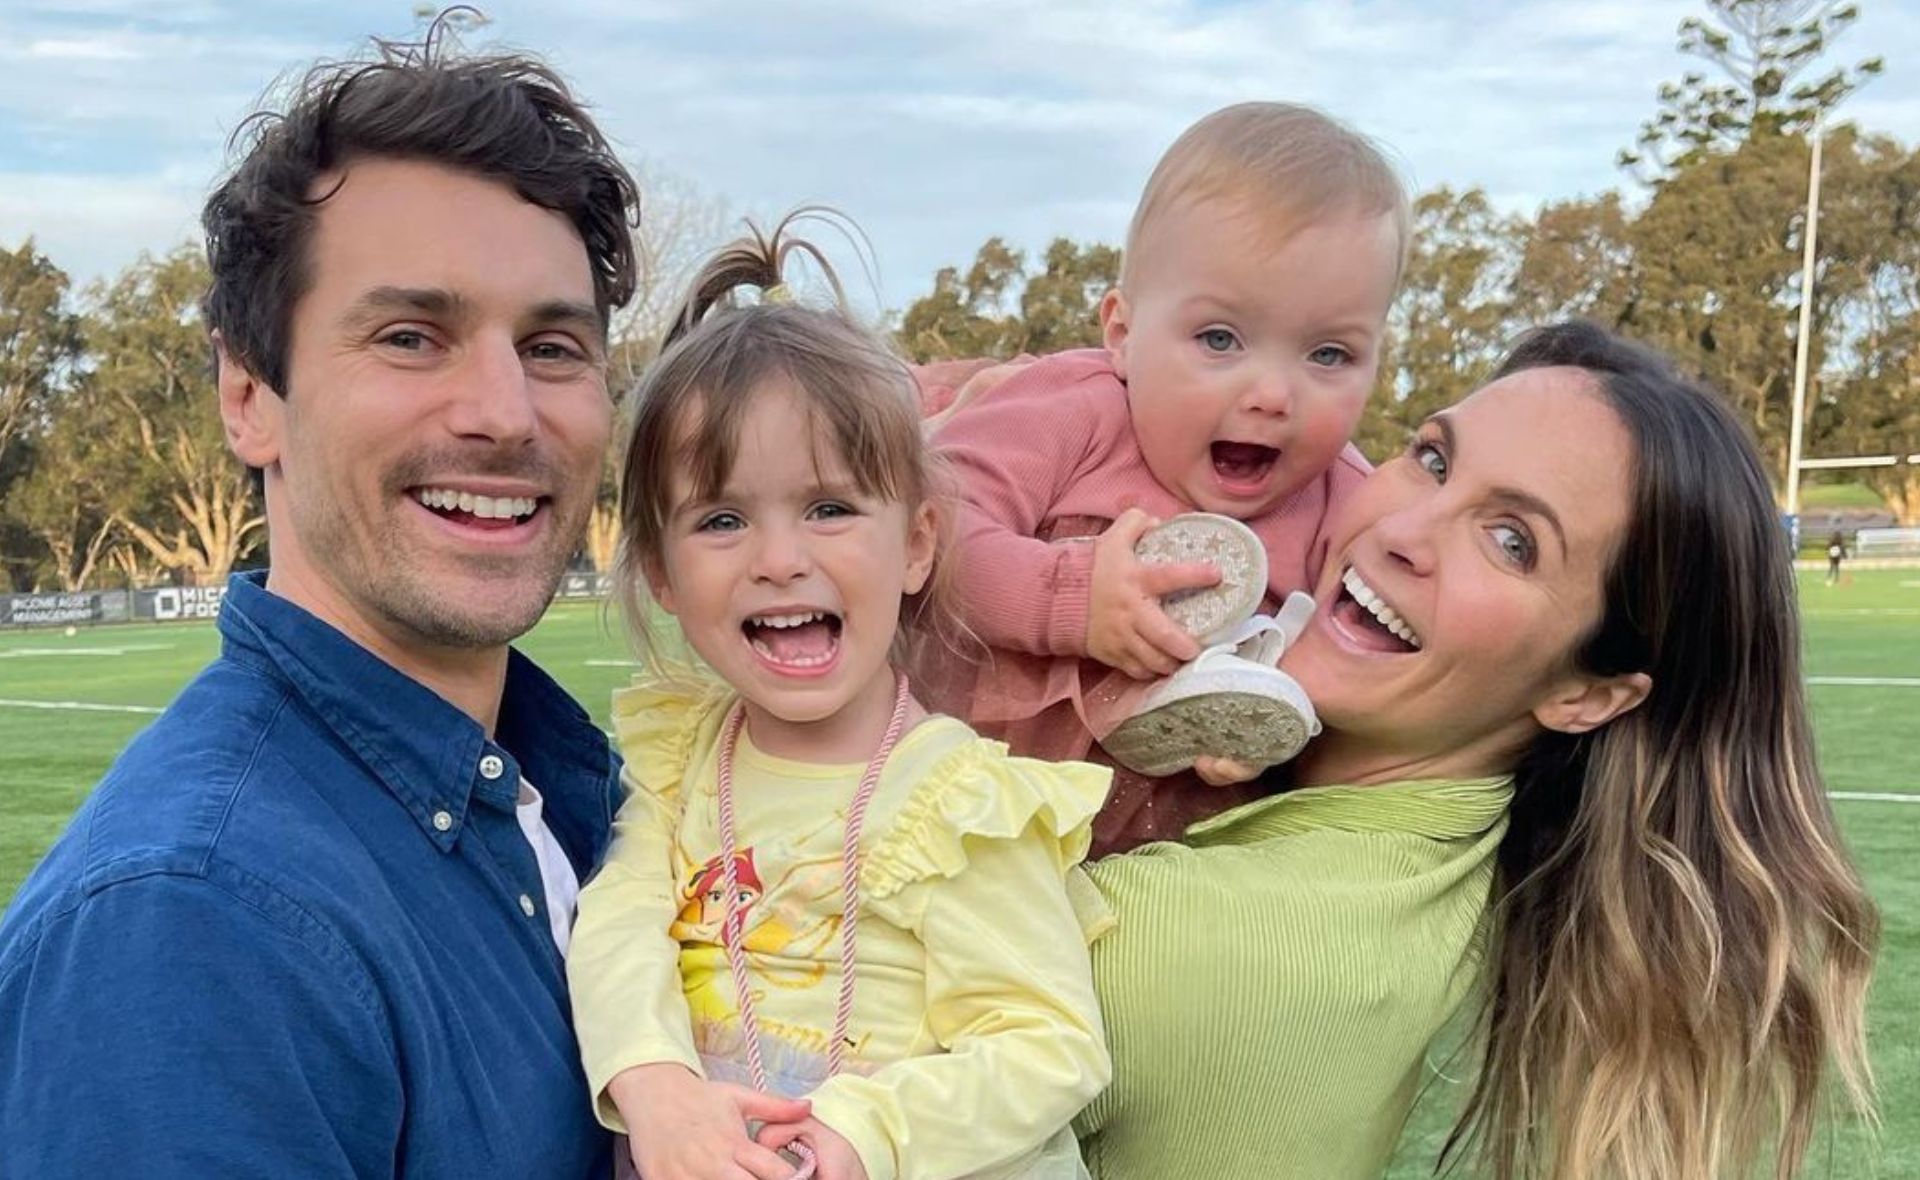 Laura Byrne and Matty J throw Marlie-Mae a birthday party fit for a “wild little beast”